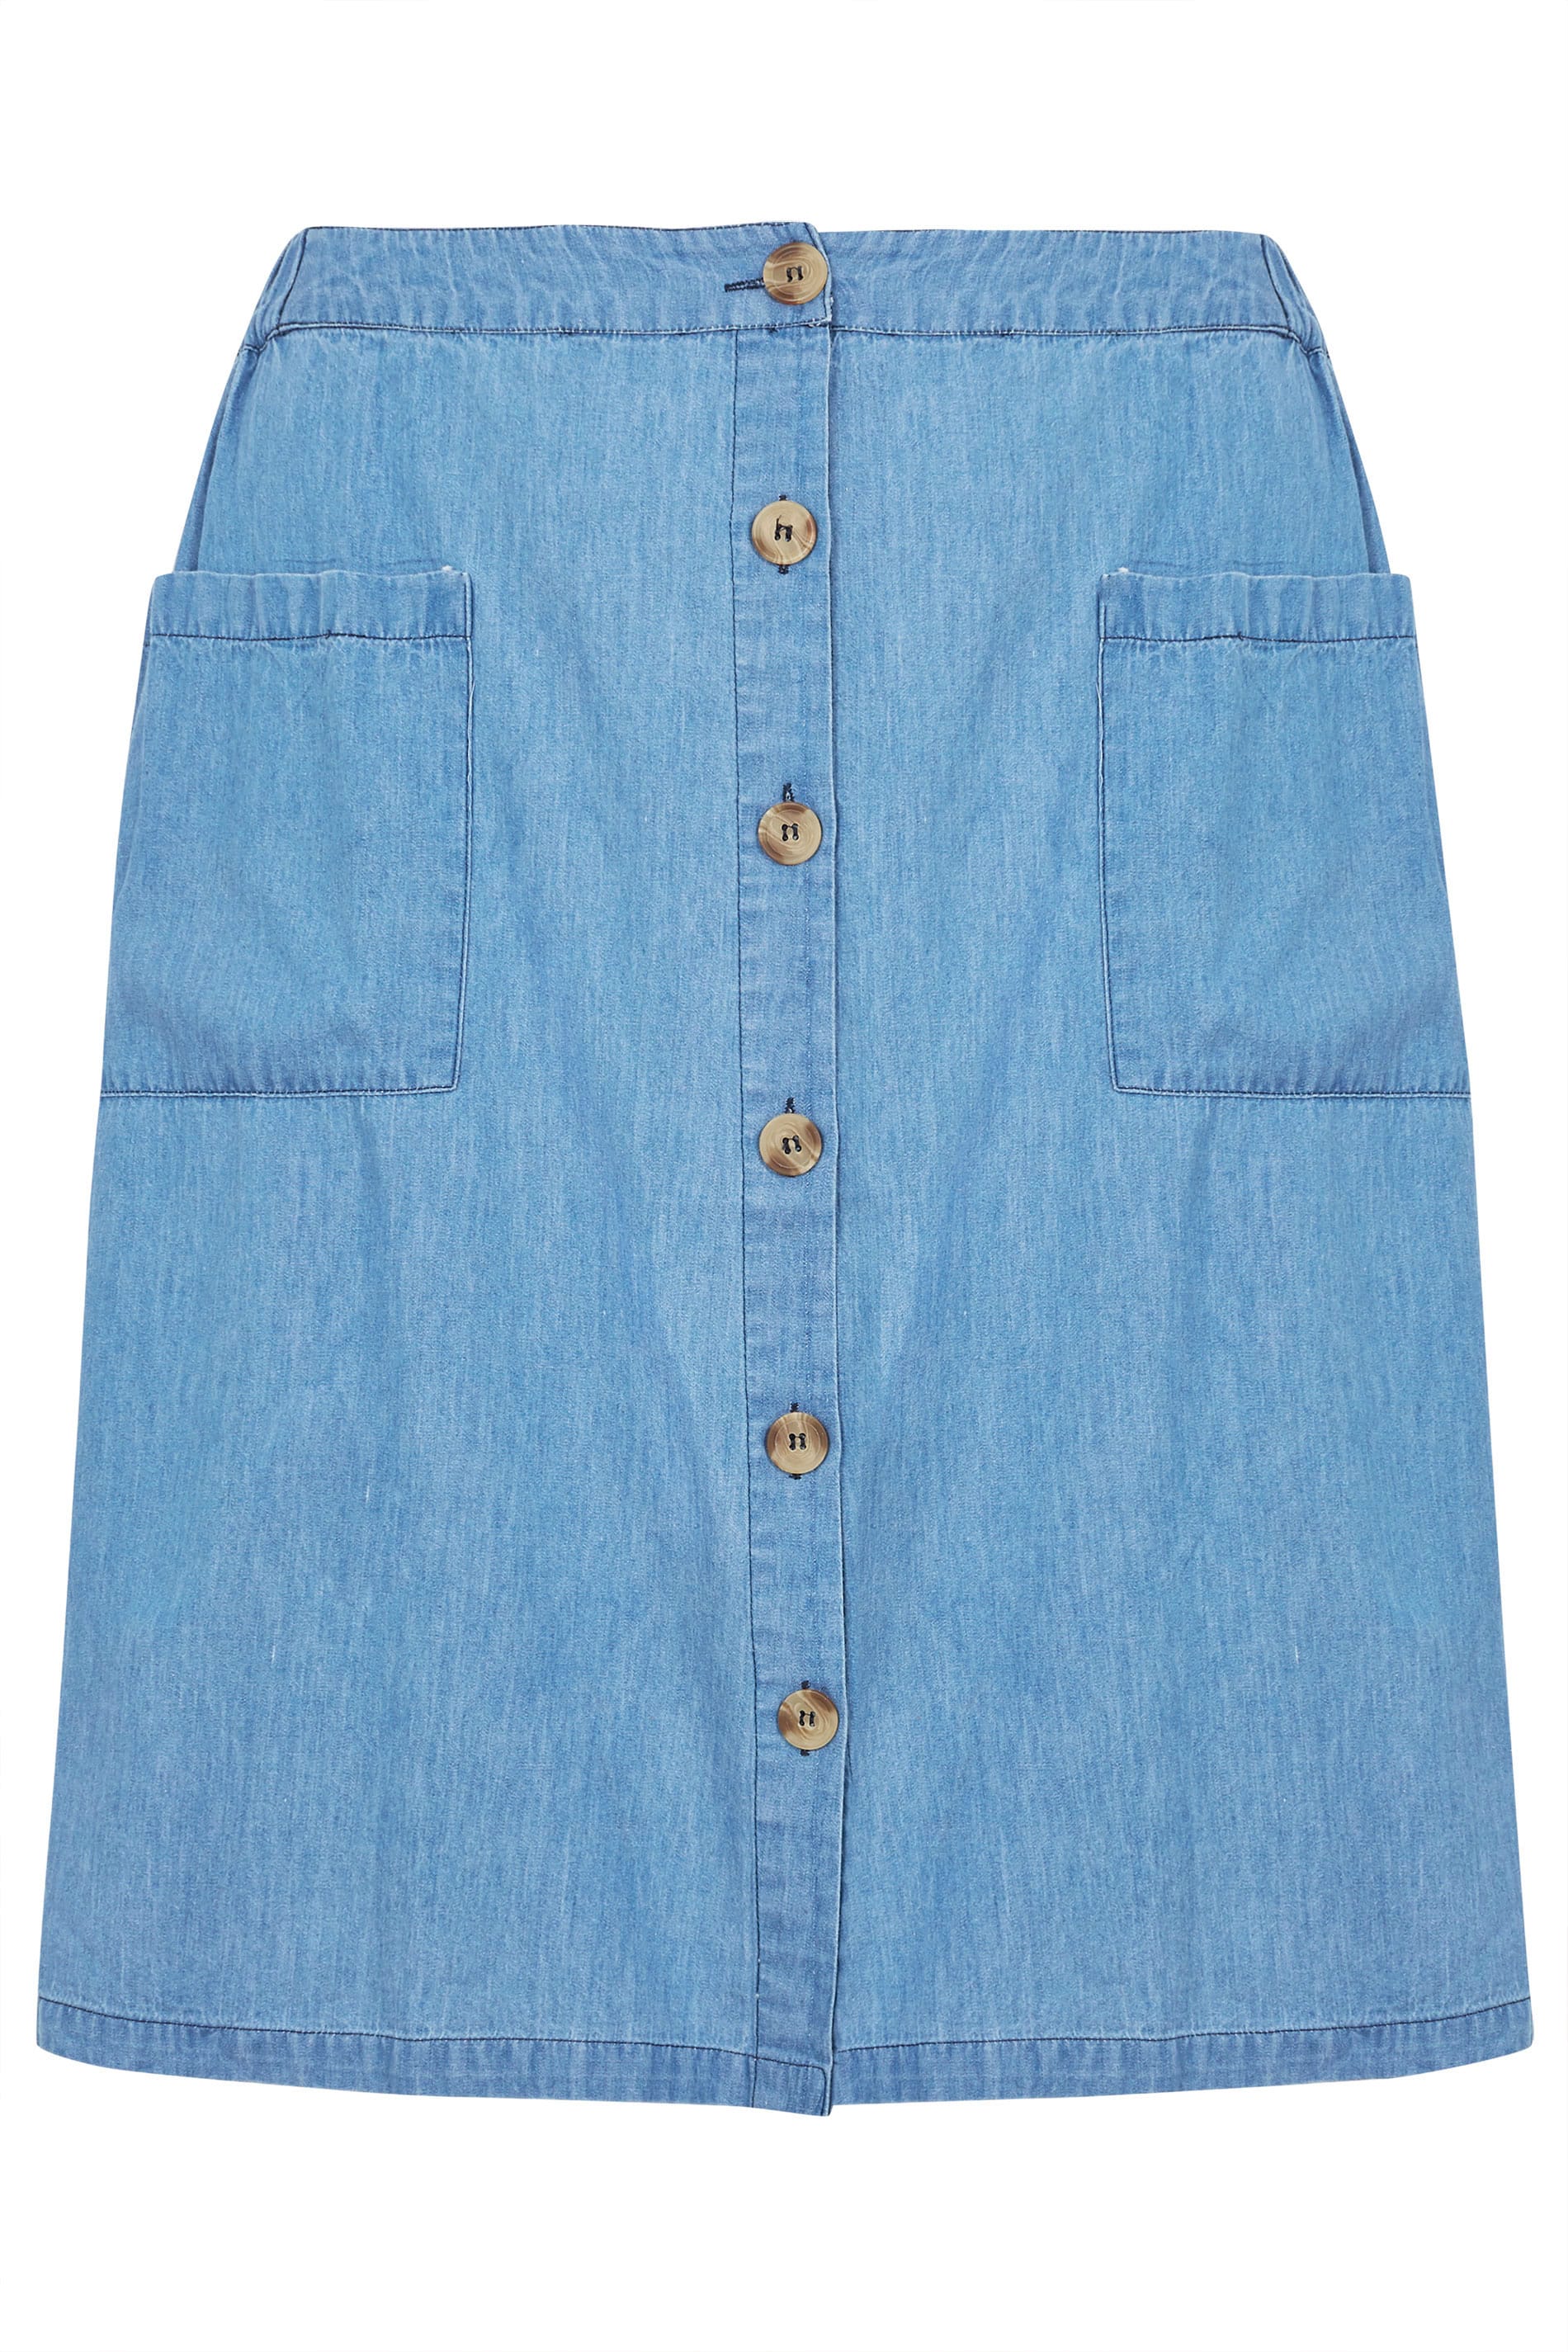 Denim Chambray Button Skirt | Plus Sizes 16 to 36 | Yours Clothing